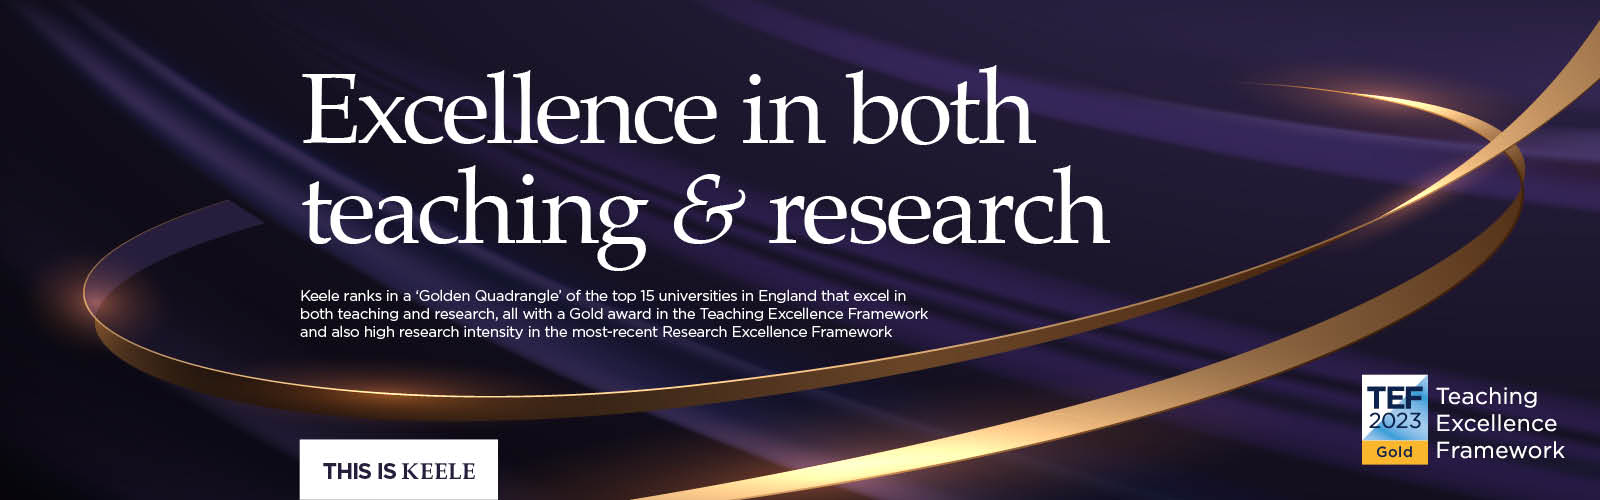 Keele ranks in a ‘Golden Quadrangle’ of the top 15 universities in England that excel in both teaching and research, all with a Gold award in the Teaching Excellence Framework and also high research intensity in the most-recent Research Excellence Framework.